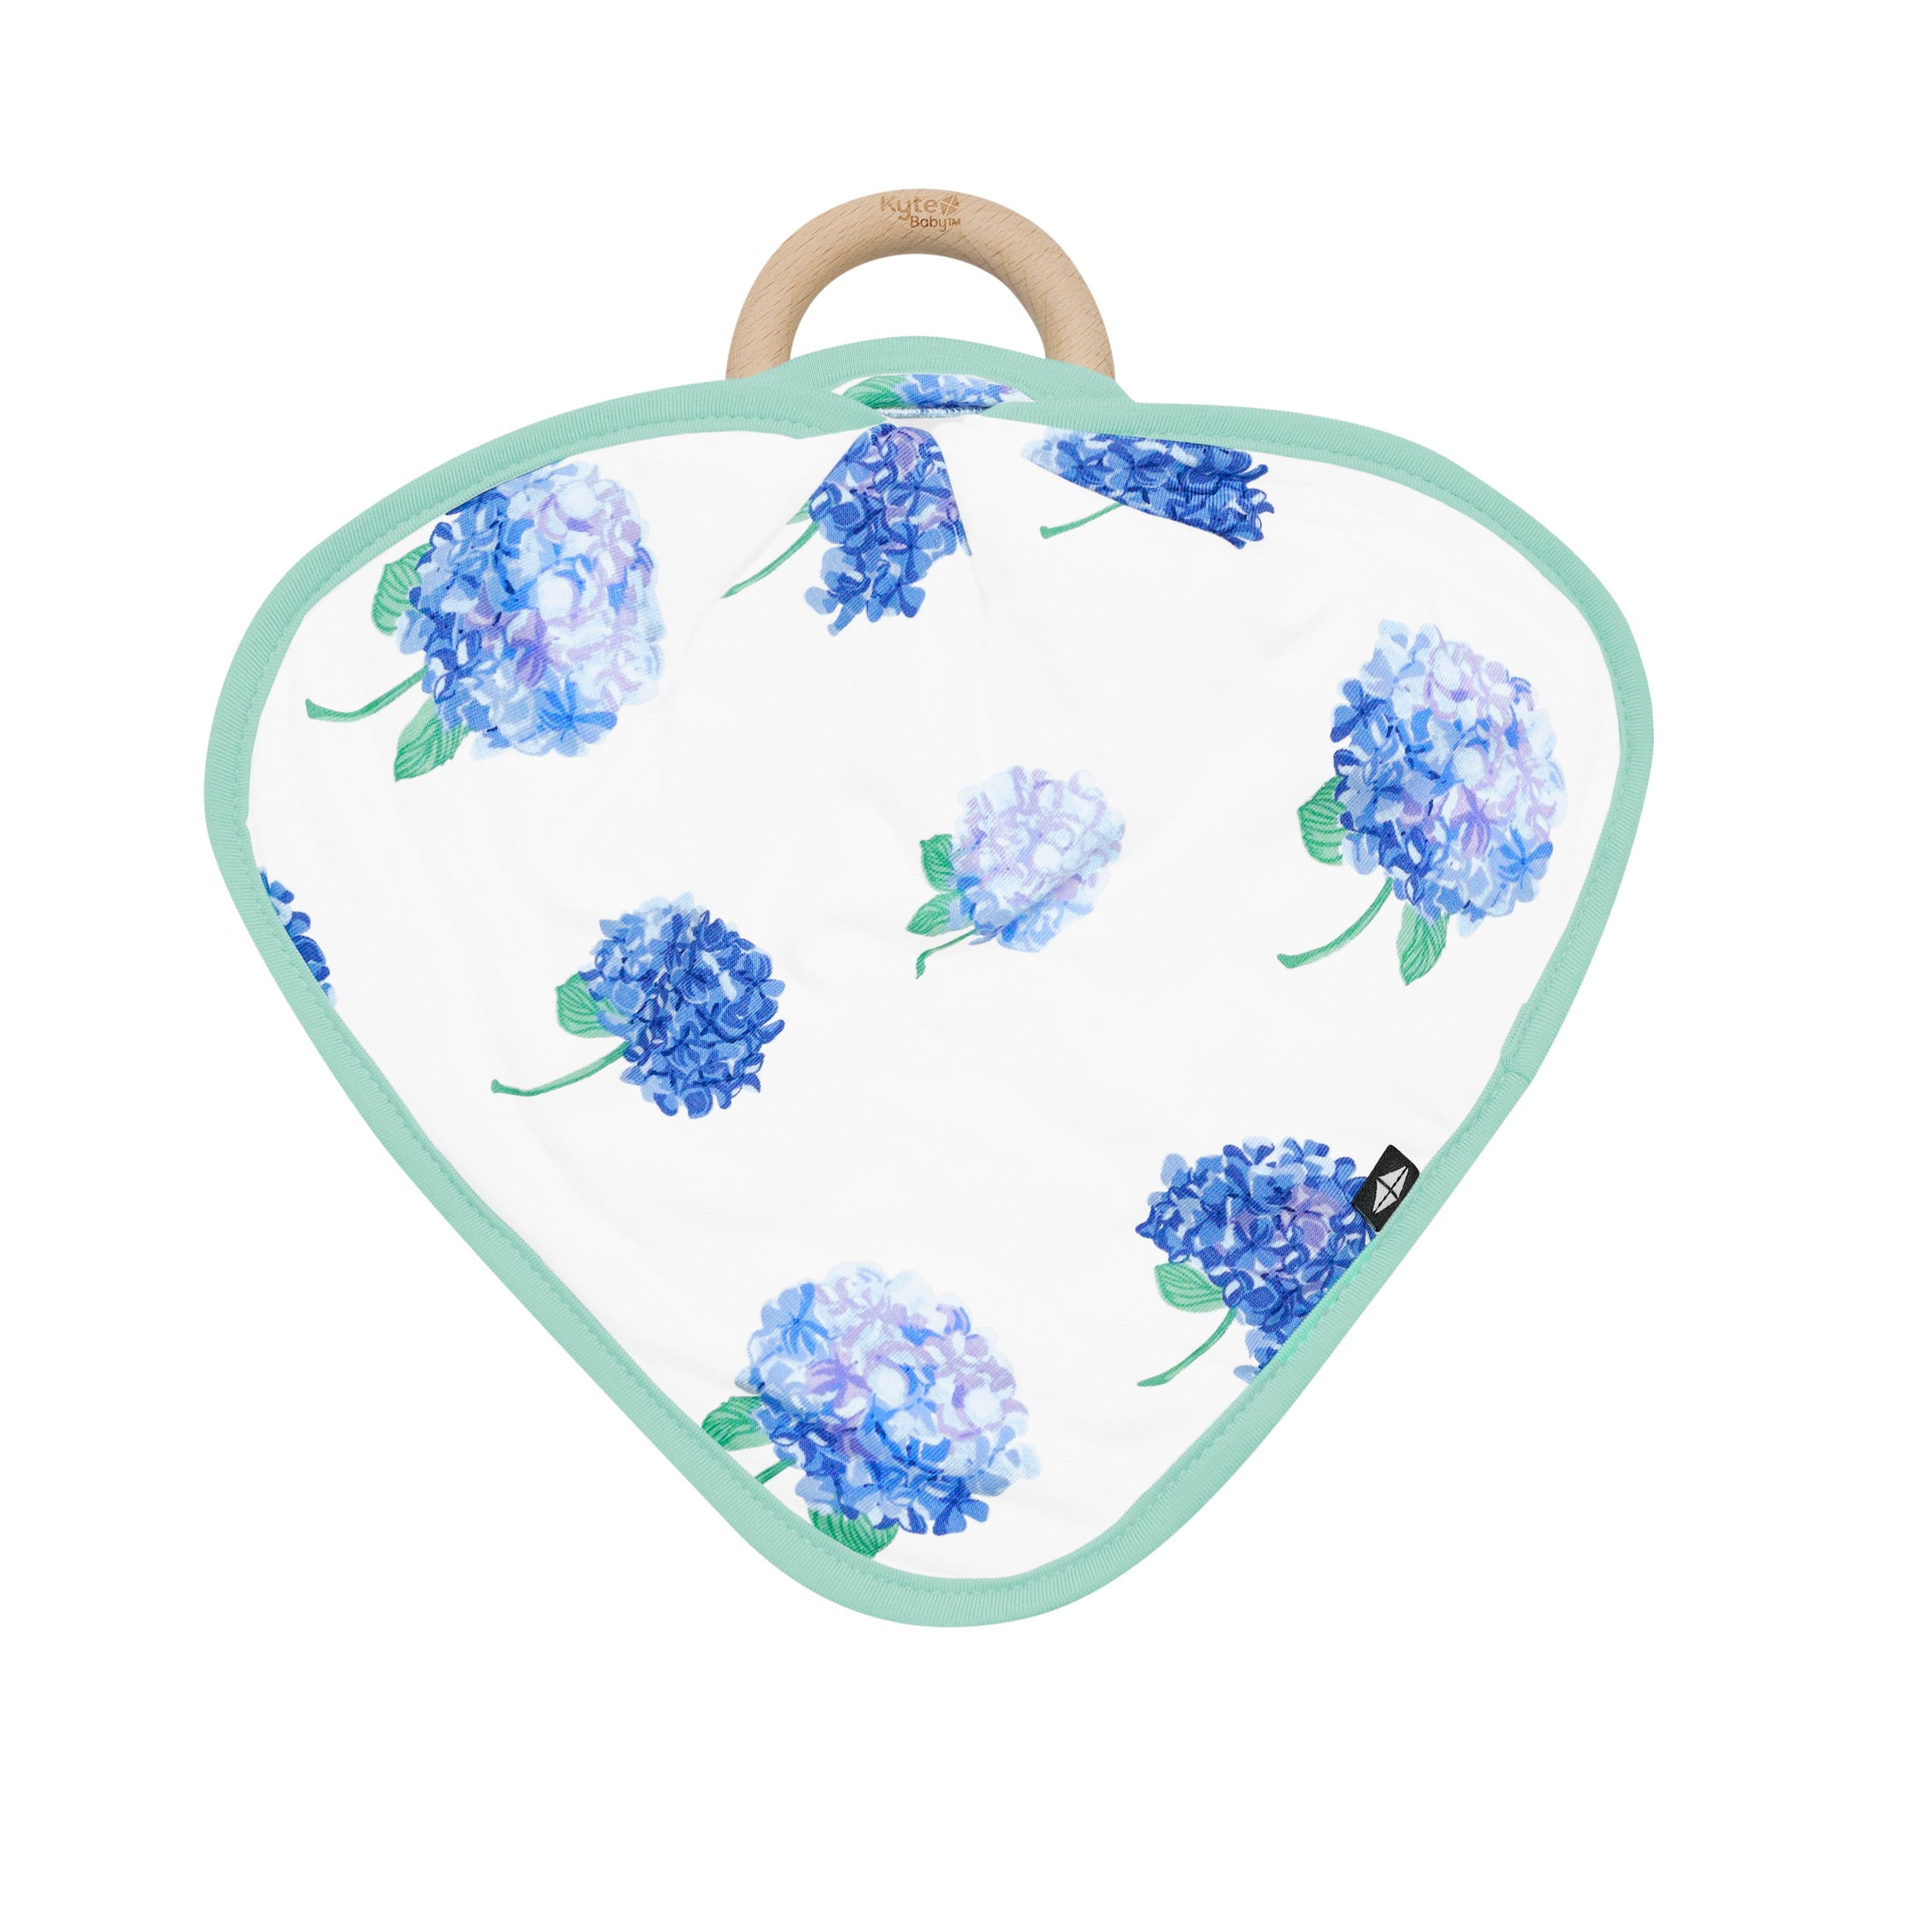 Kyte Baby Lovey Hydrangea / Infant Lovey in Hydrangea with Removable Teething Ring